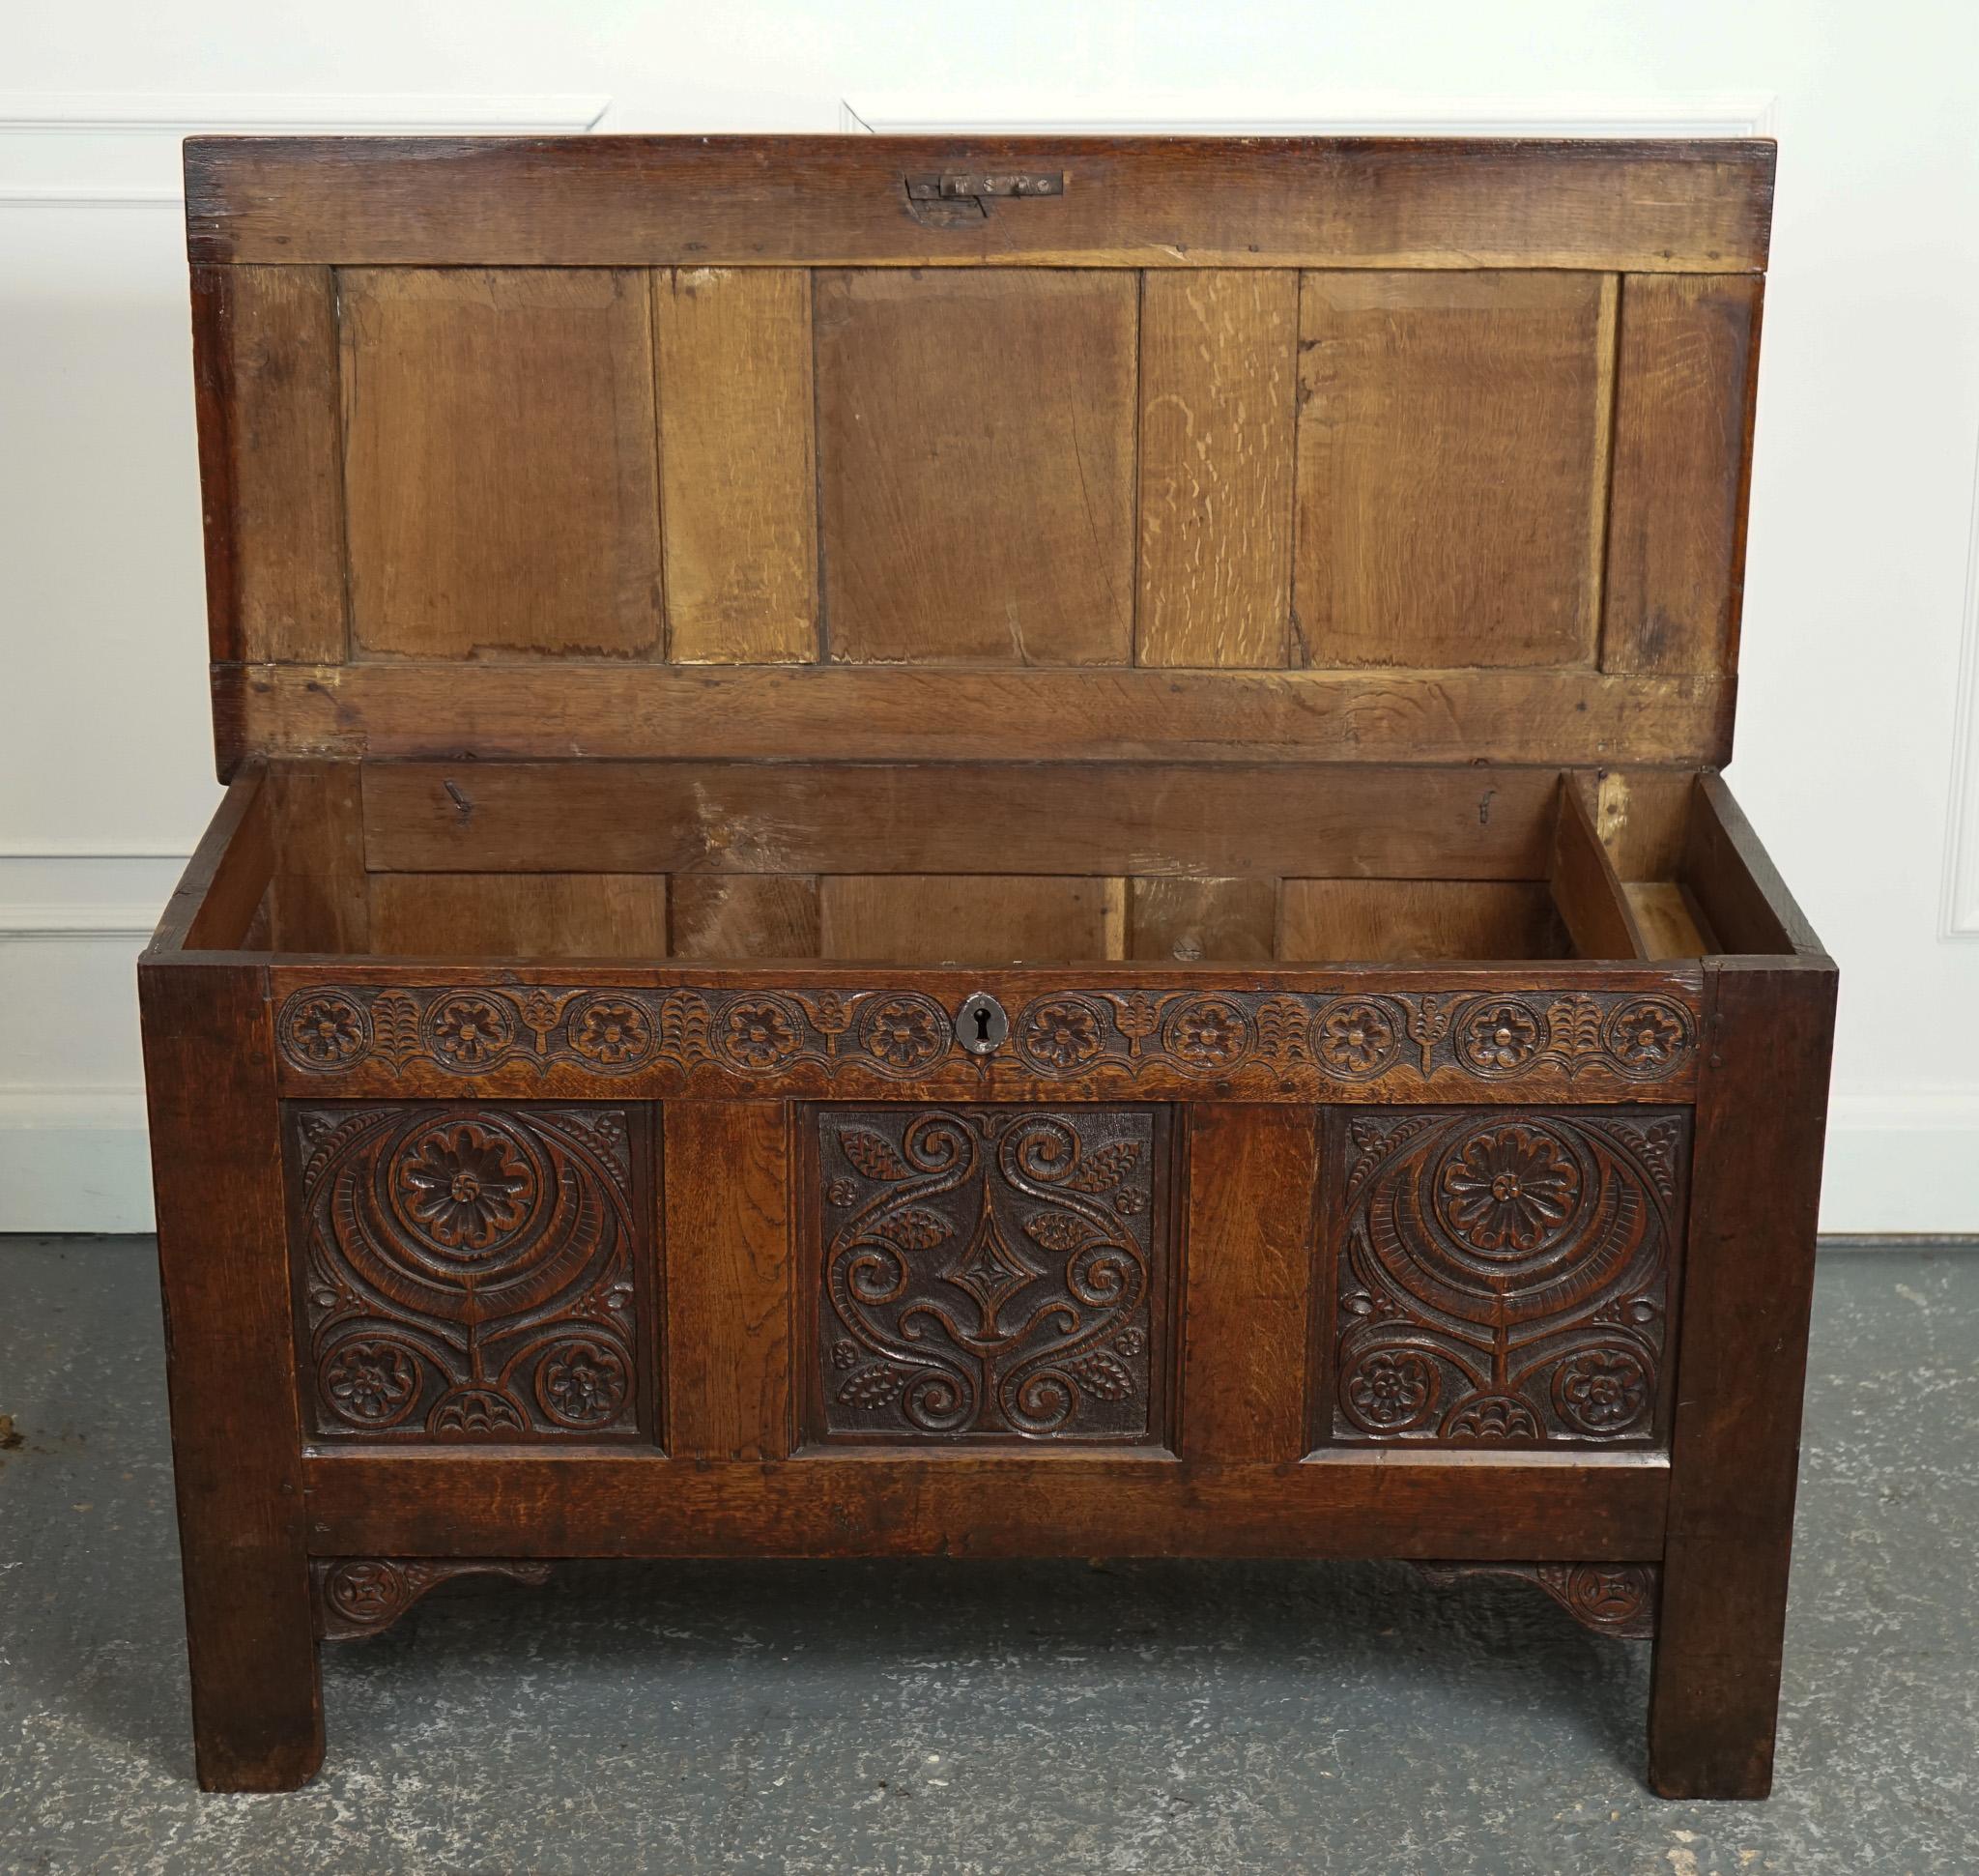 LOVELY 17TH CENTURY CARVED ANTIQUE OAK TRUNK CHEST COFFER j1 In Good Condition For Sale In Pulborough, GB